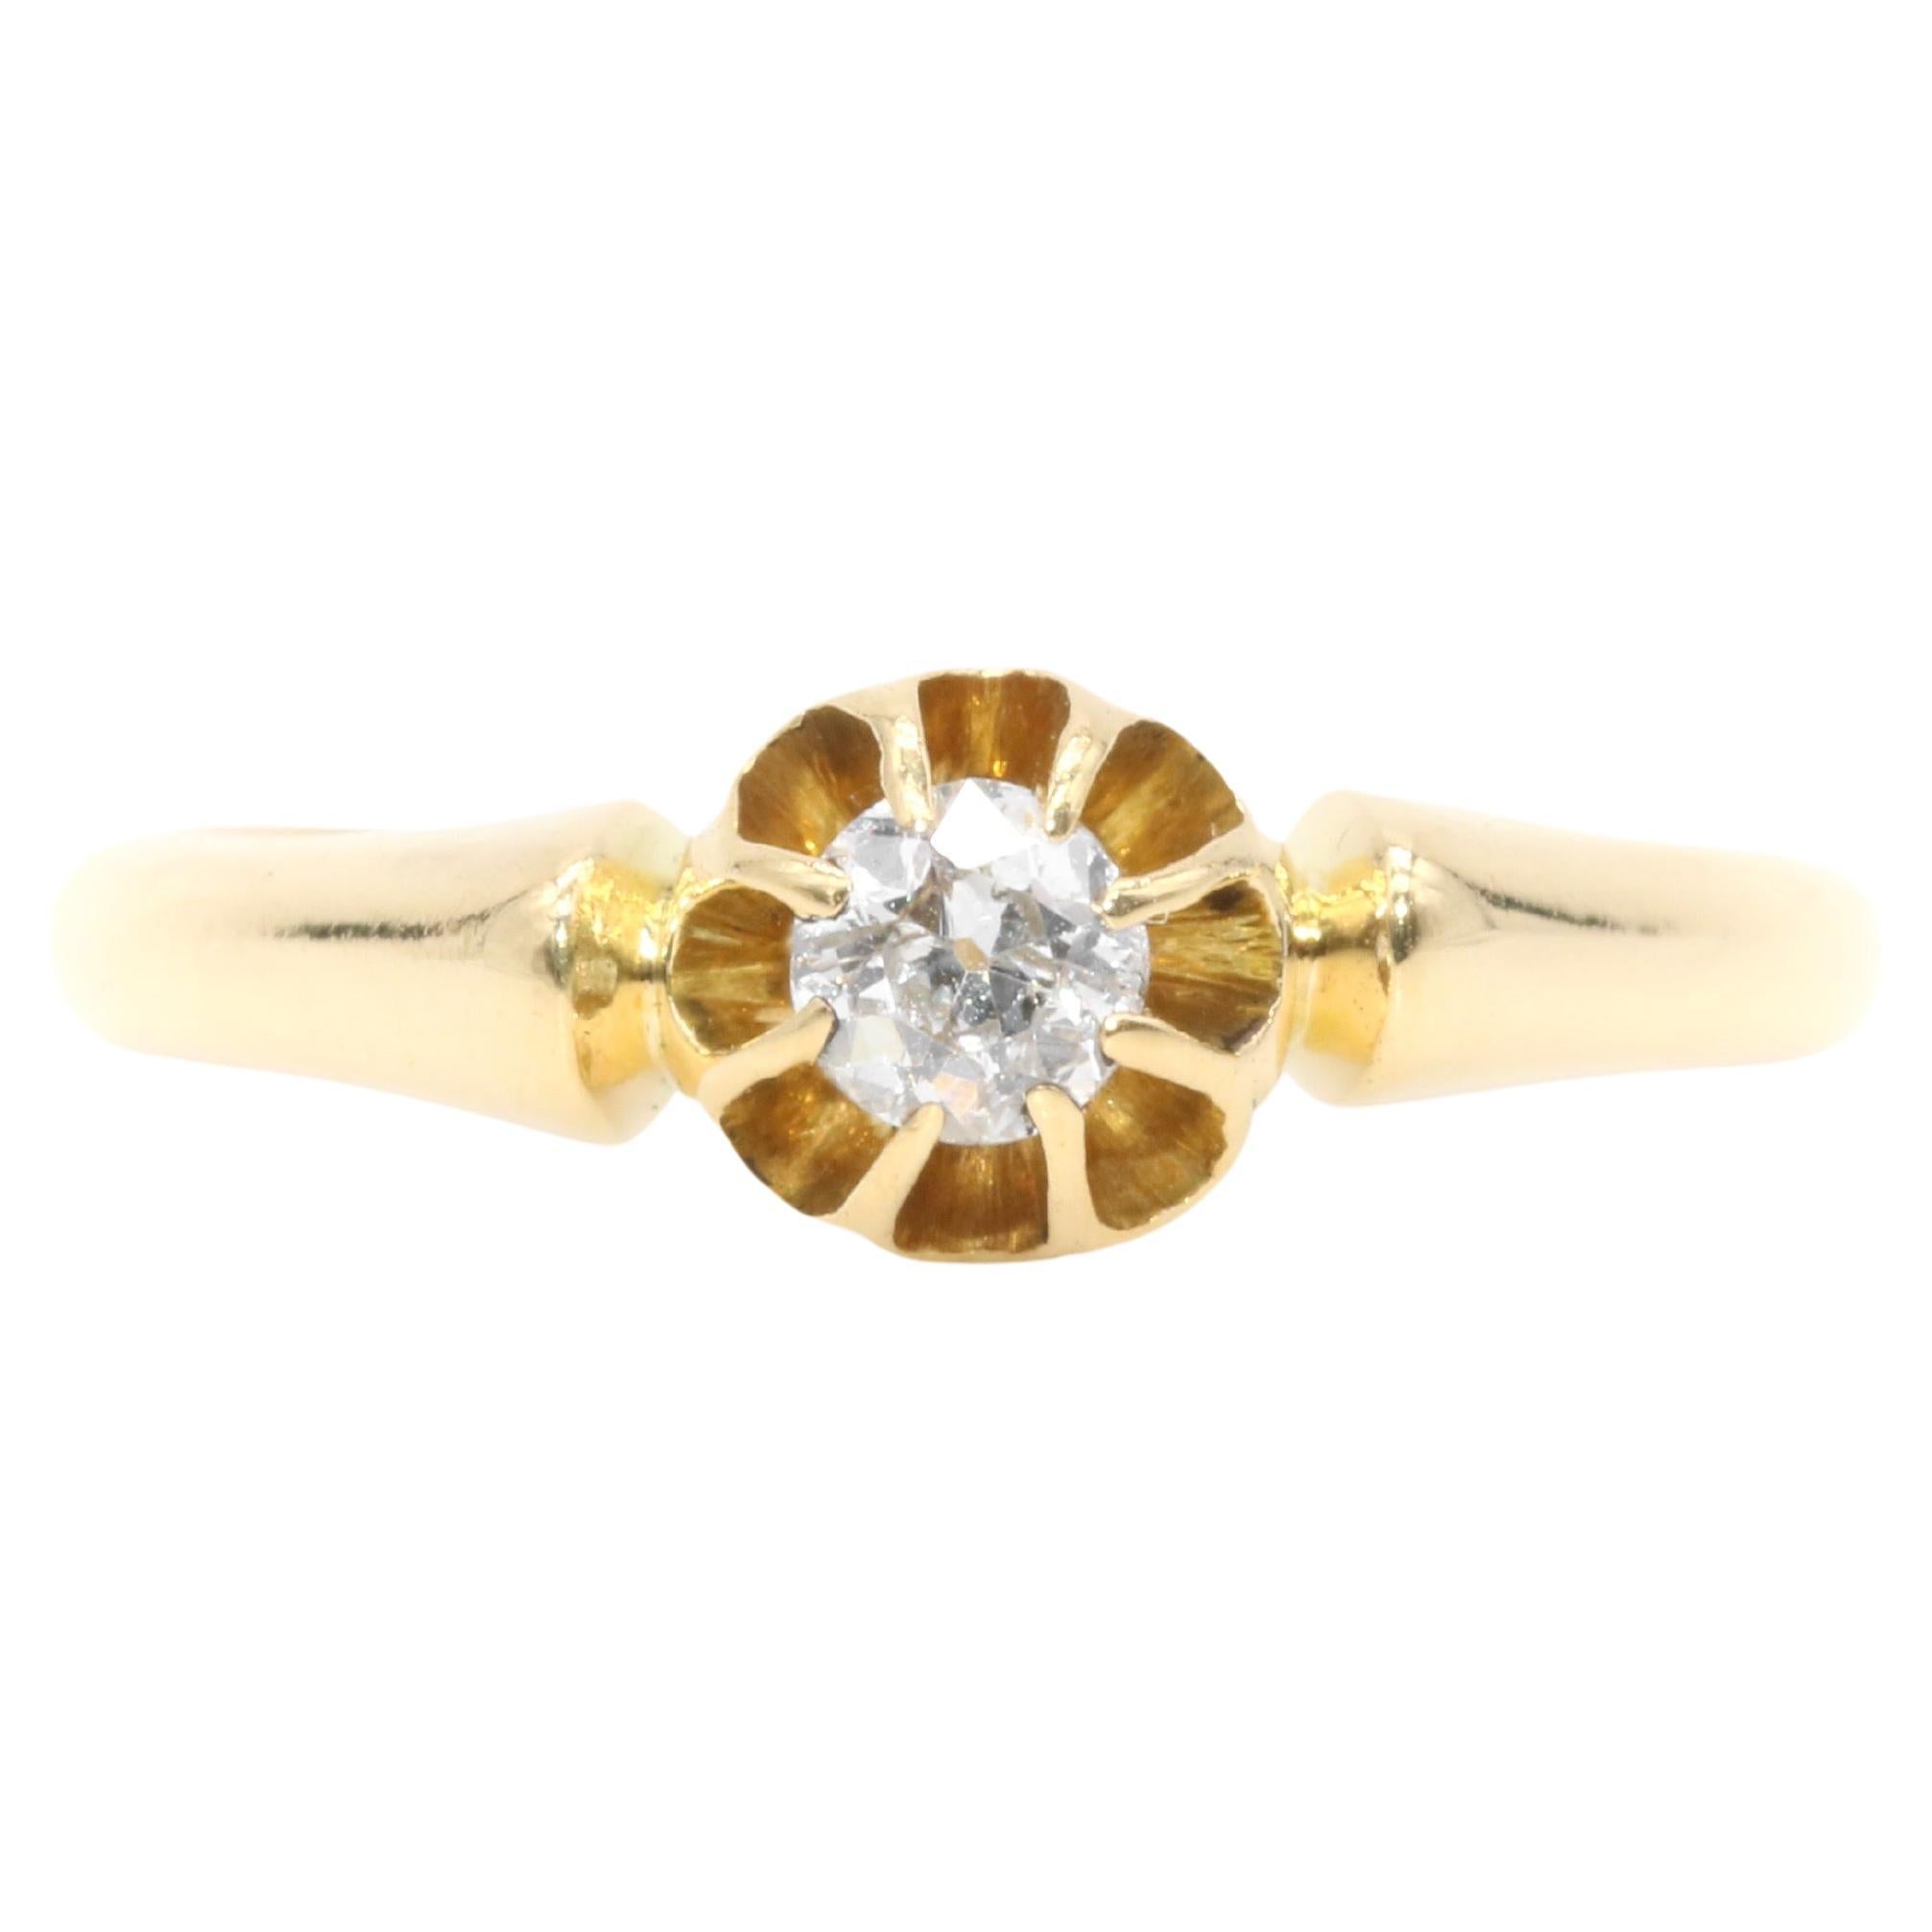 Antique Edwardian 18K Yellow Gold Old Cut Diamond Belcher Solitaire Ring